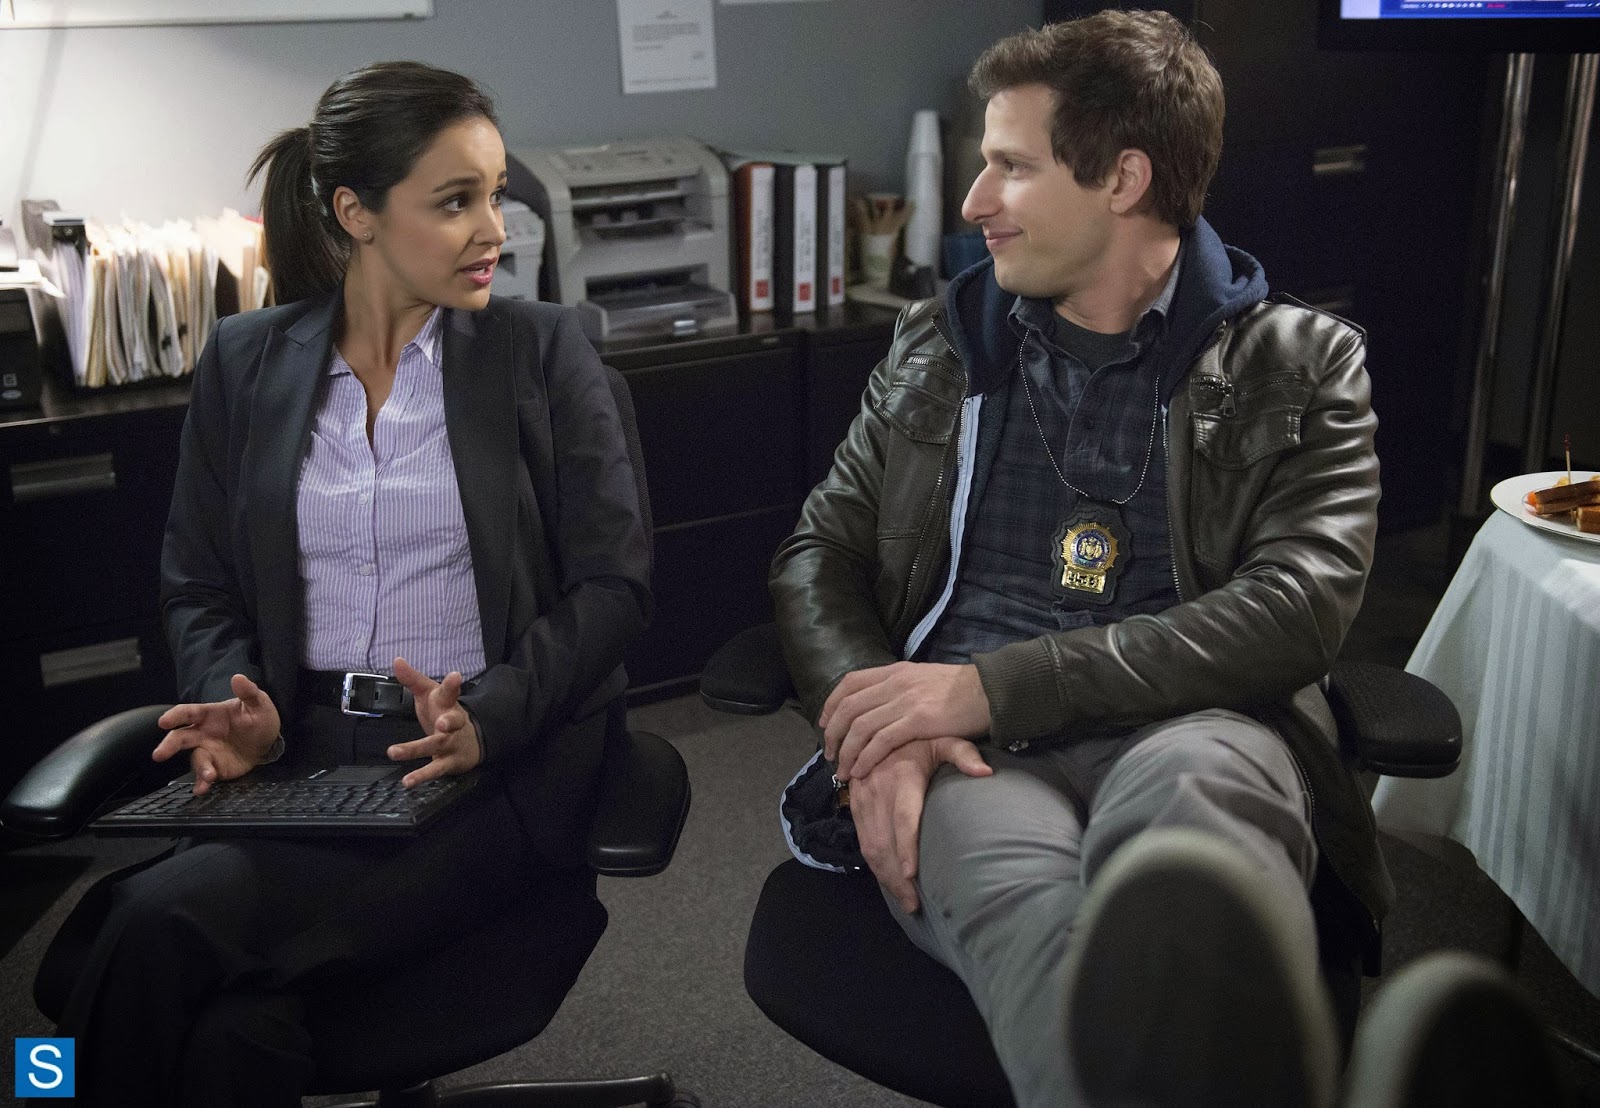 Brooklyn Nine-Nine - Episode 1.15 & 1.16 - Operation: Broken Feather & The Party - Review